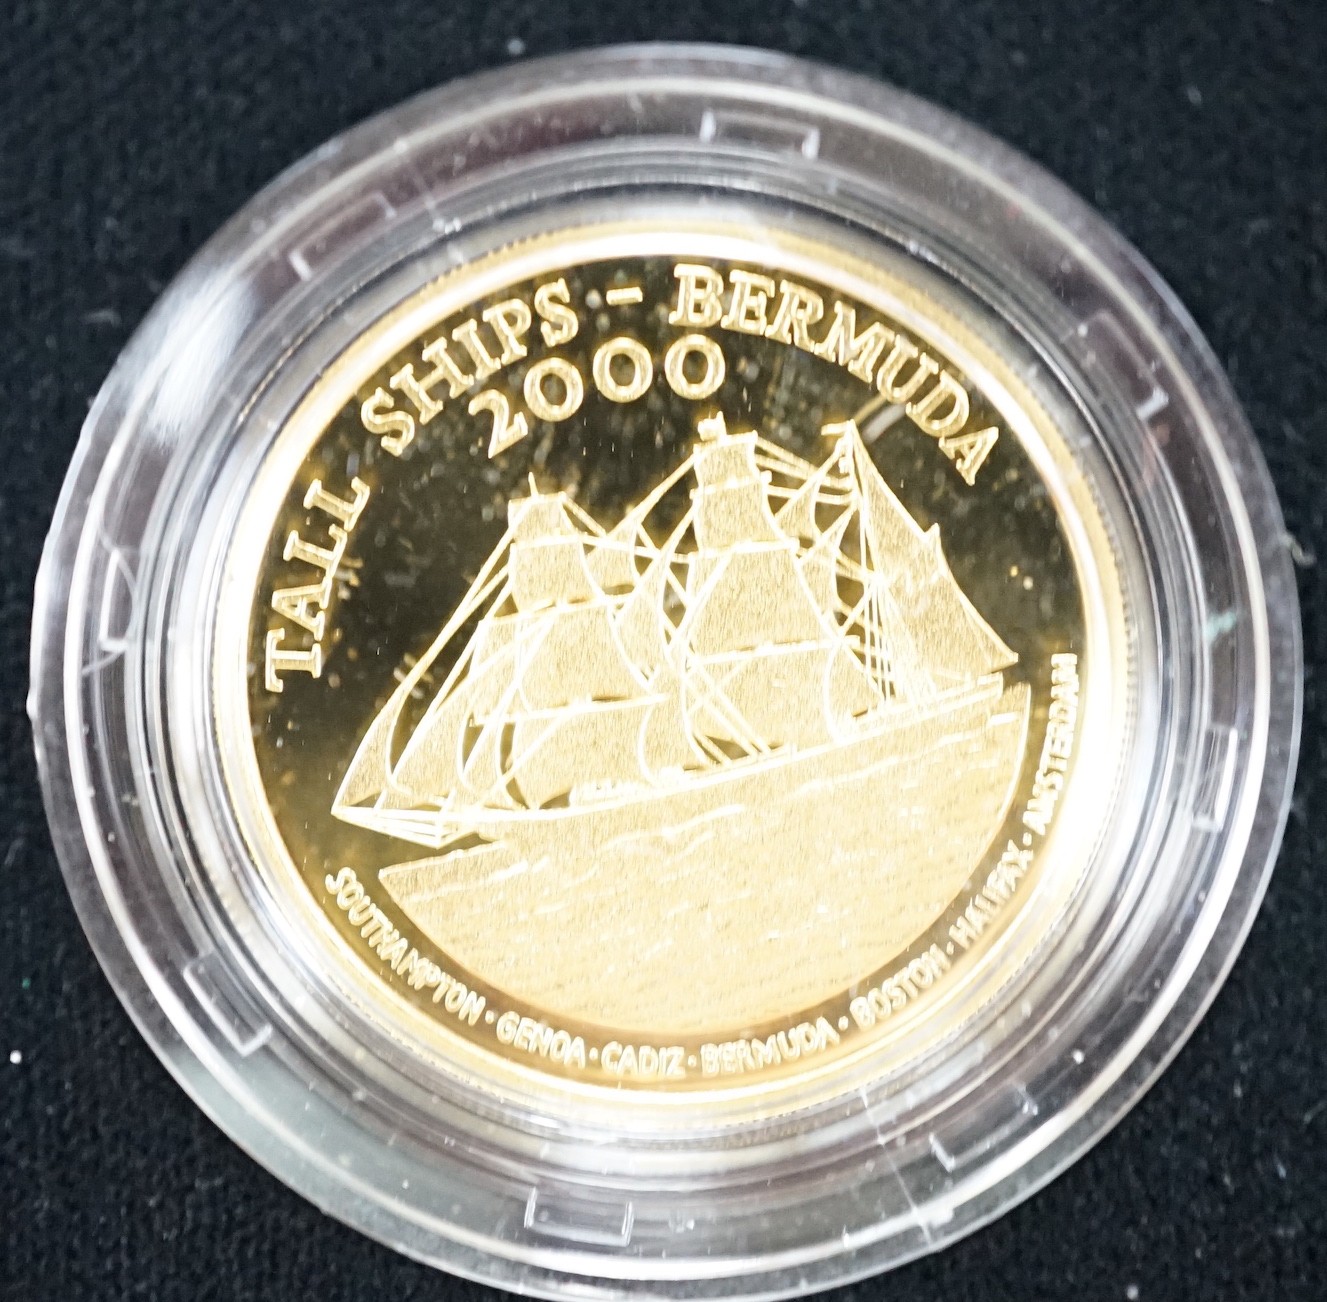 A cased Tall Ships Bermuda 2000 Race of the Century Commemorative gold proof $15 coin, with certificate, no. 0387.